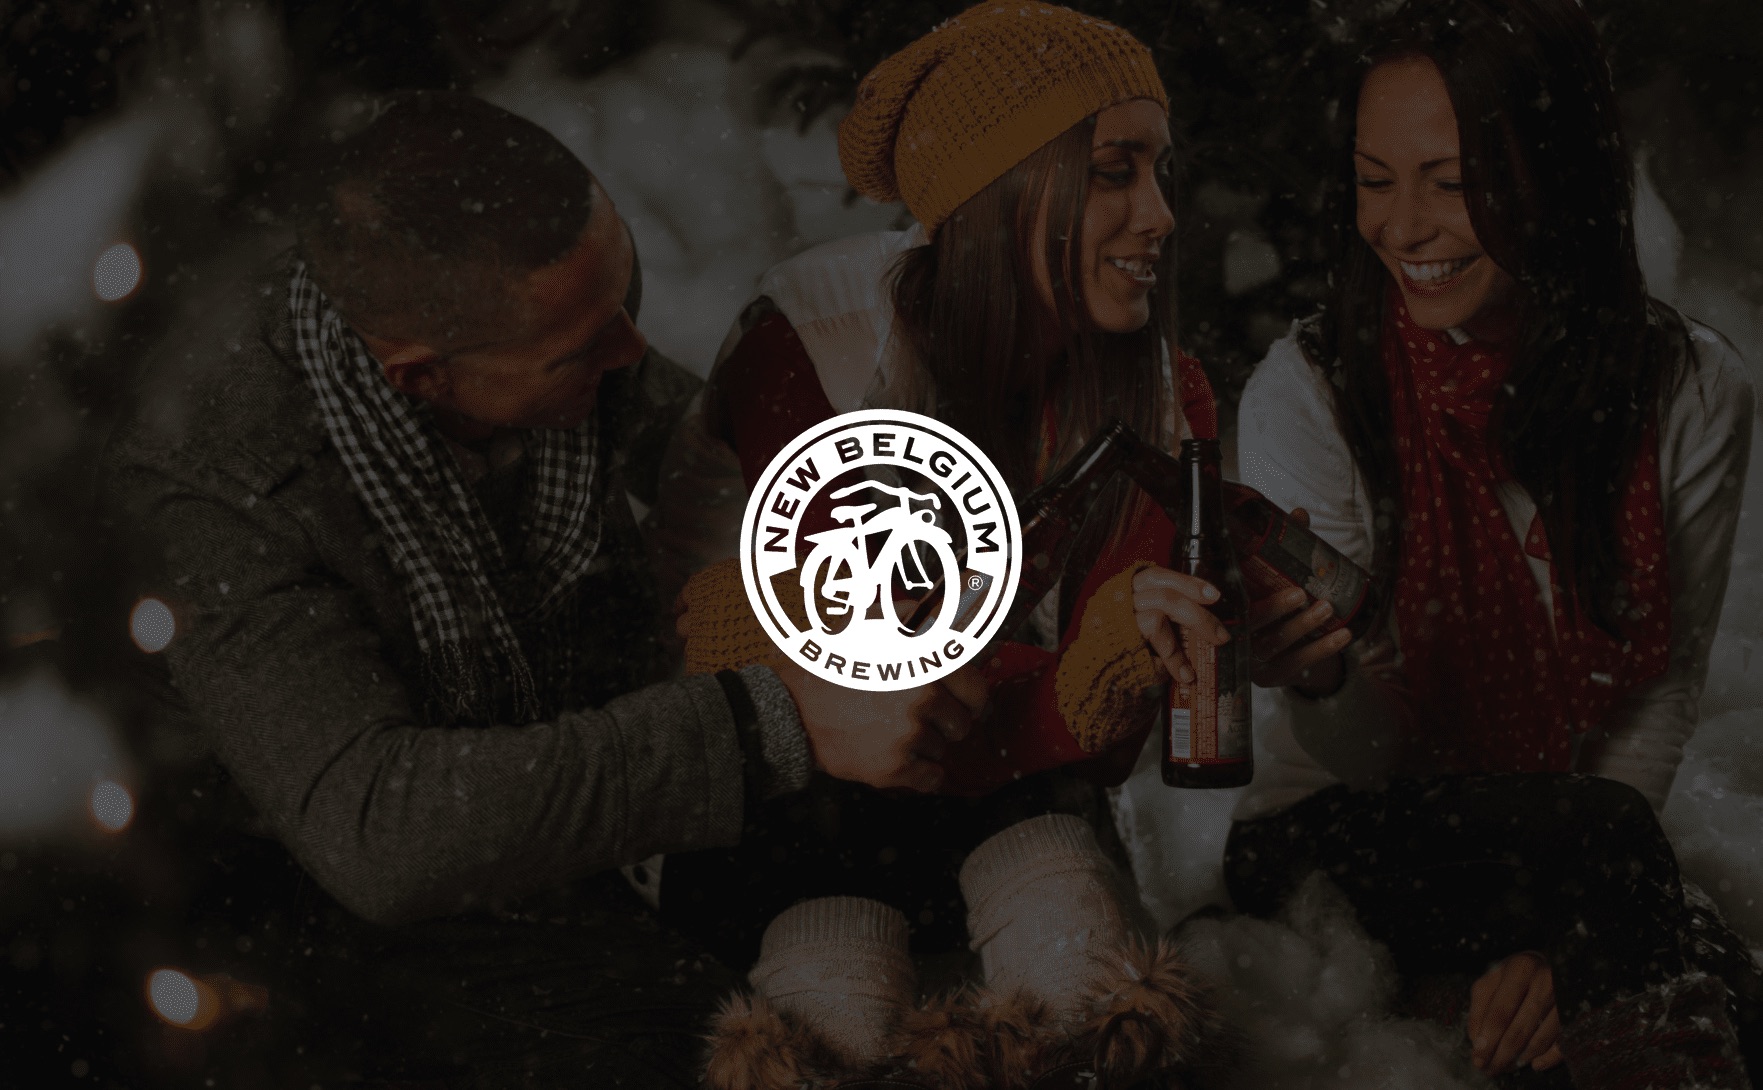 White New Belgium Brewing logo with man and two women toasting beer bottles in a winter scene in the background